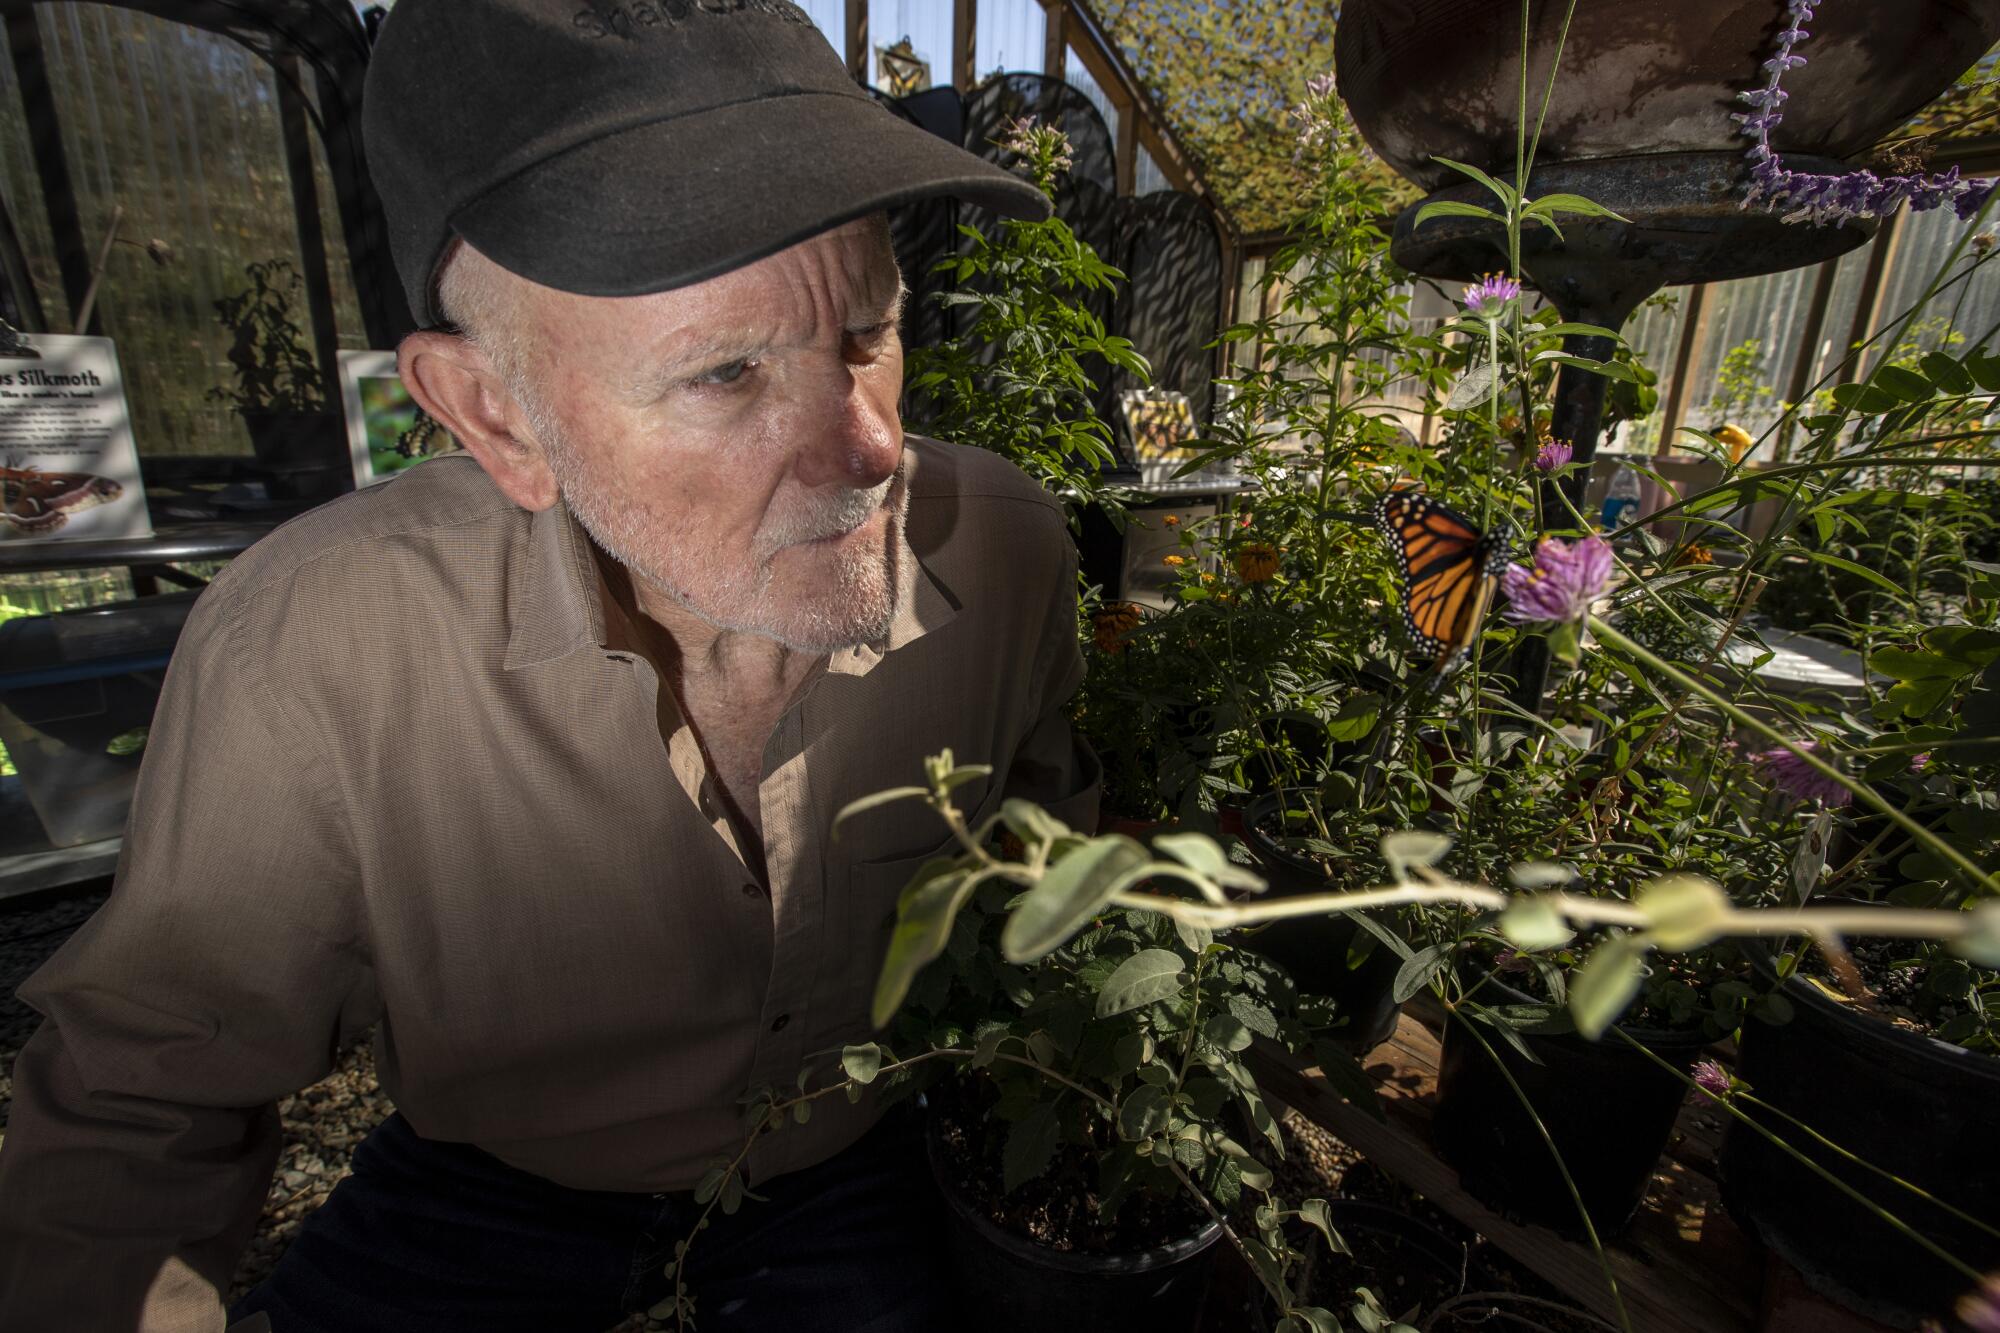 The Mountain Mermaid's Bill Buerge looks at a monarch butterfly in his butterfly house.